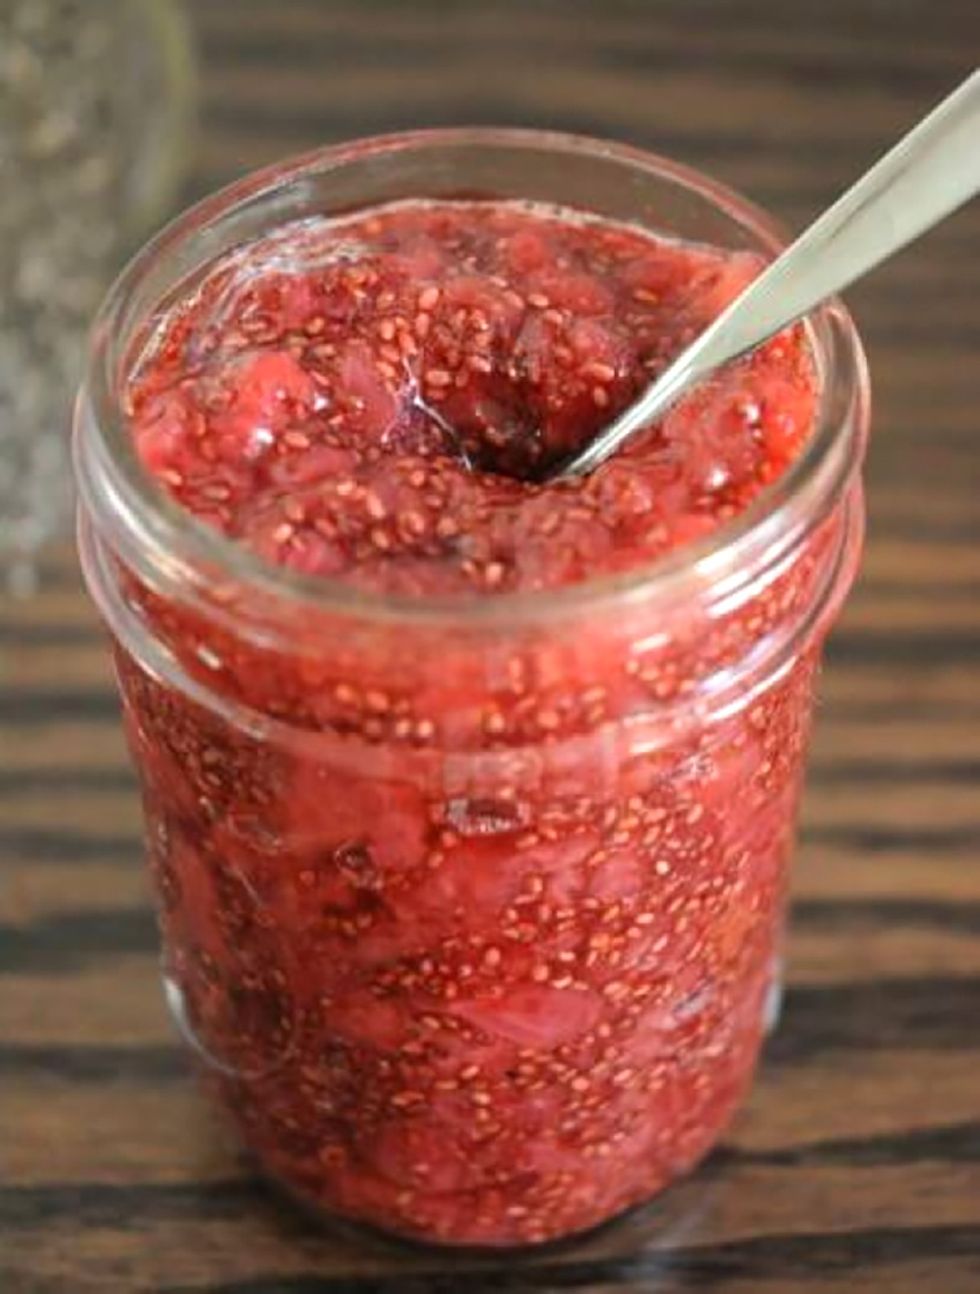 13 Vegan Chia Seed Recipes Guaranteed to Superfood Your Diet - EcoWatch